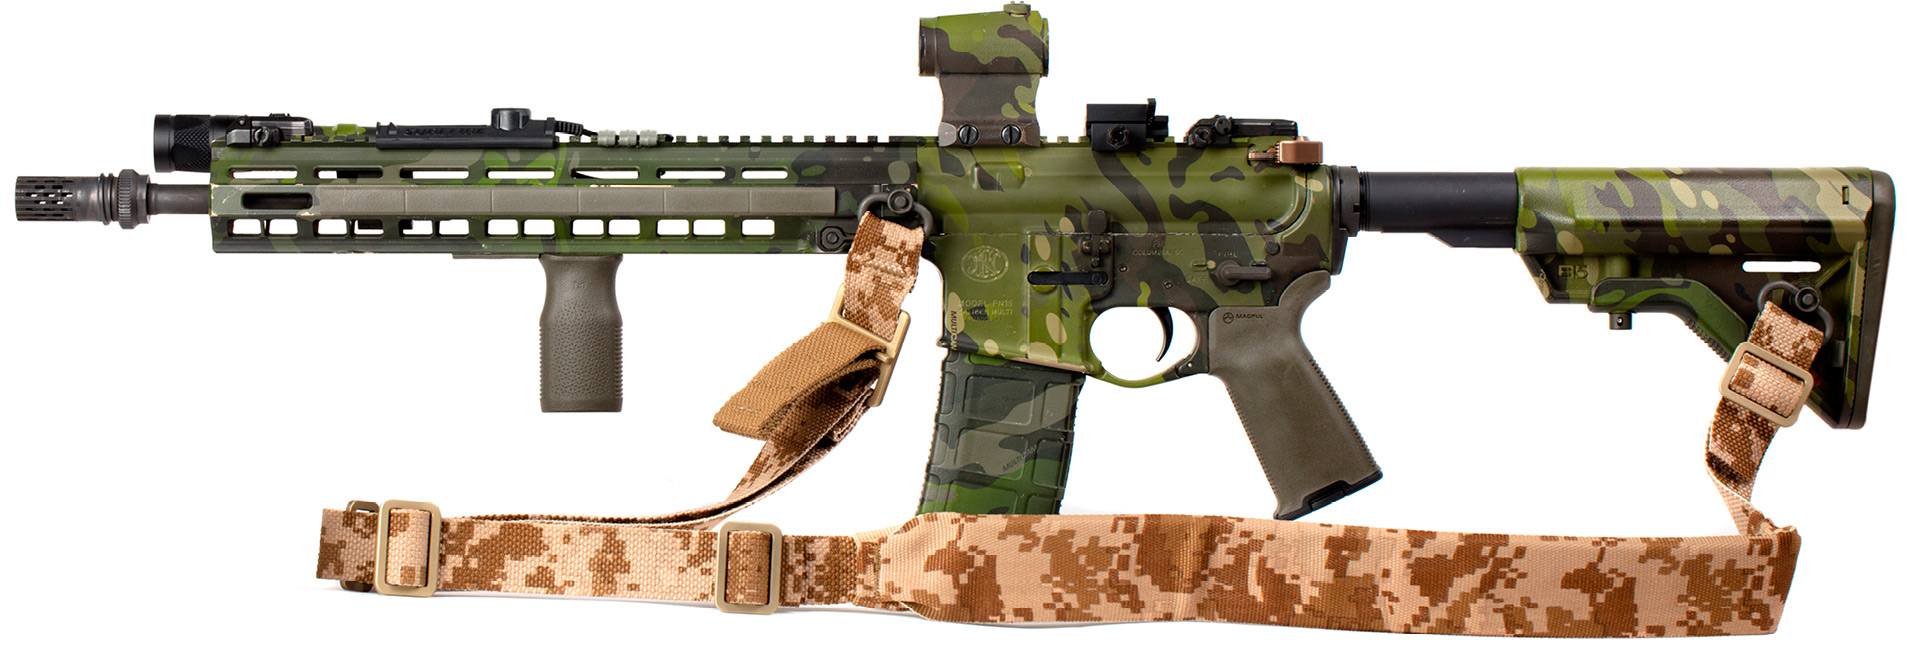 Tropical painted AR with QD Sling in Desert Digital